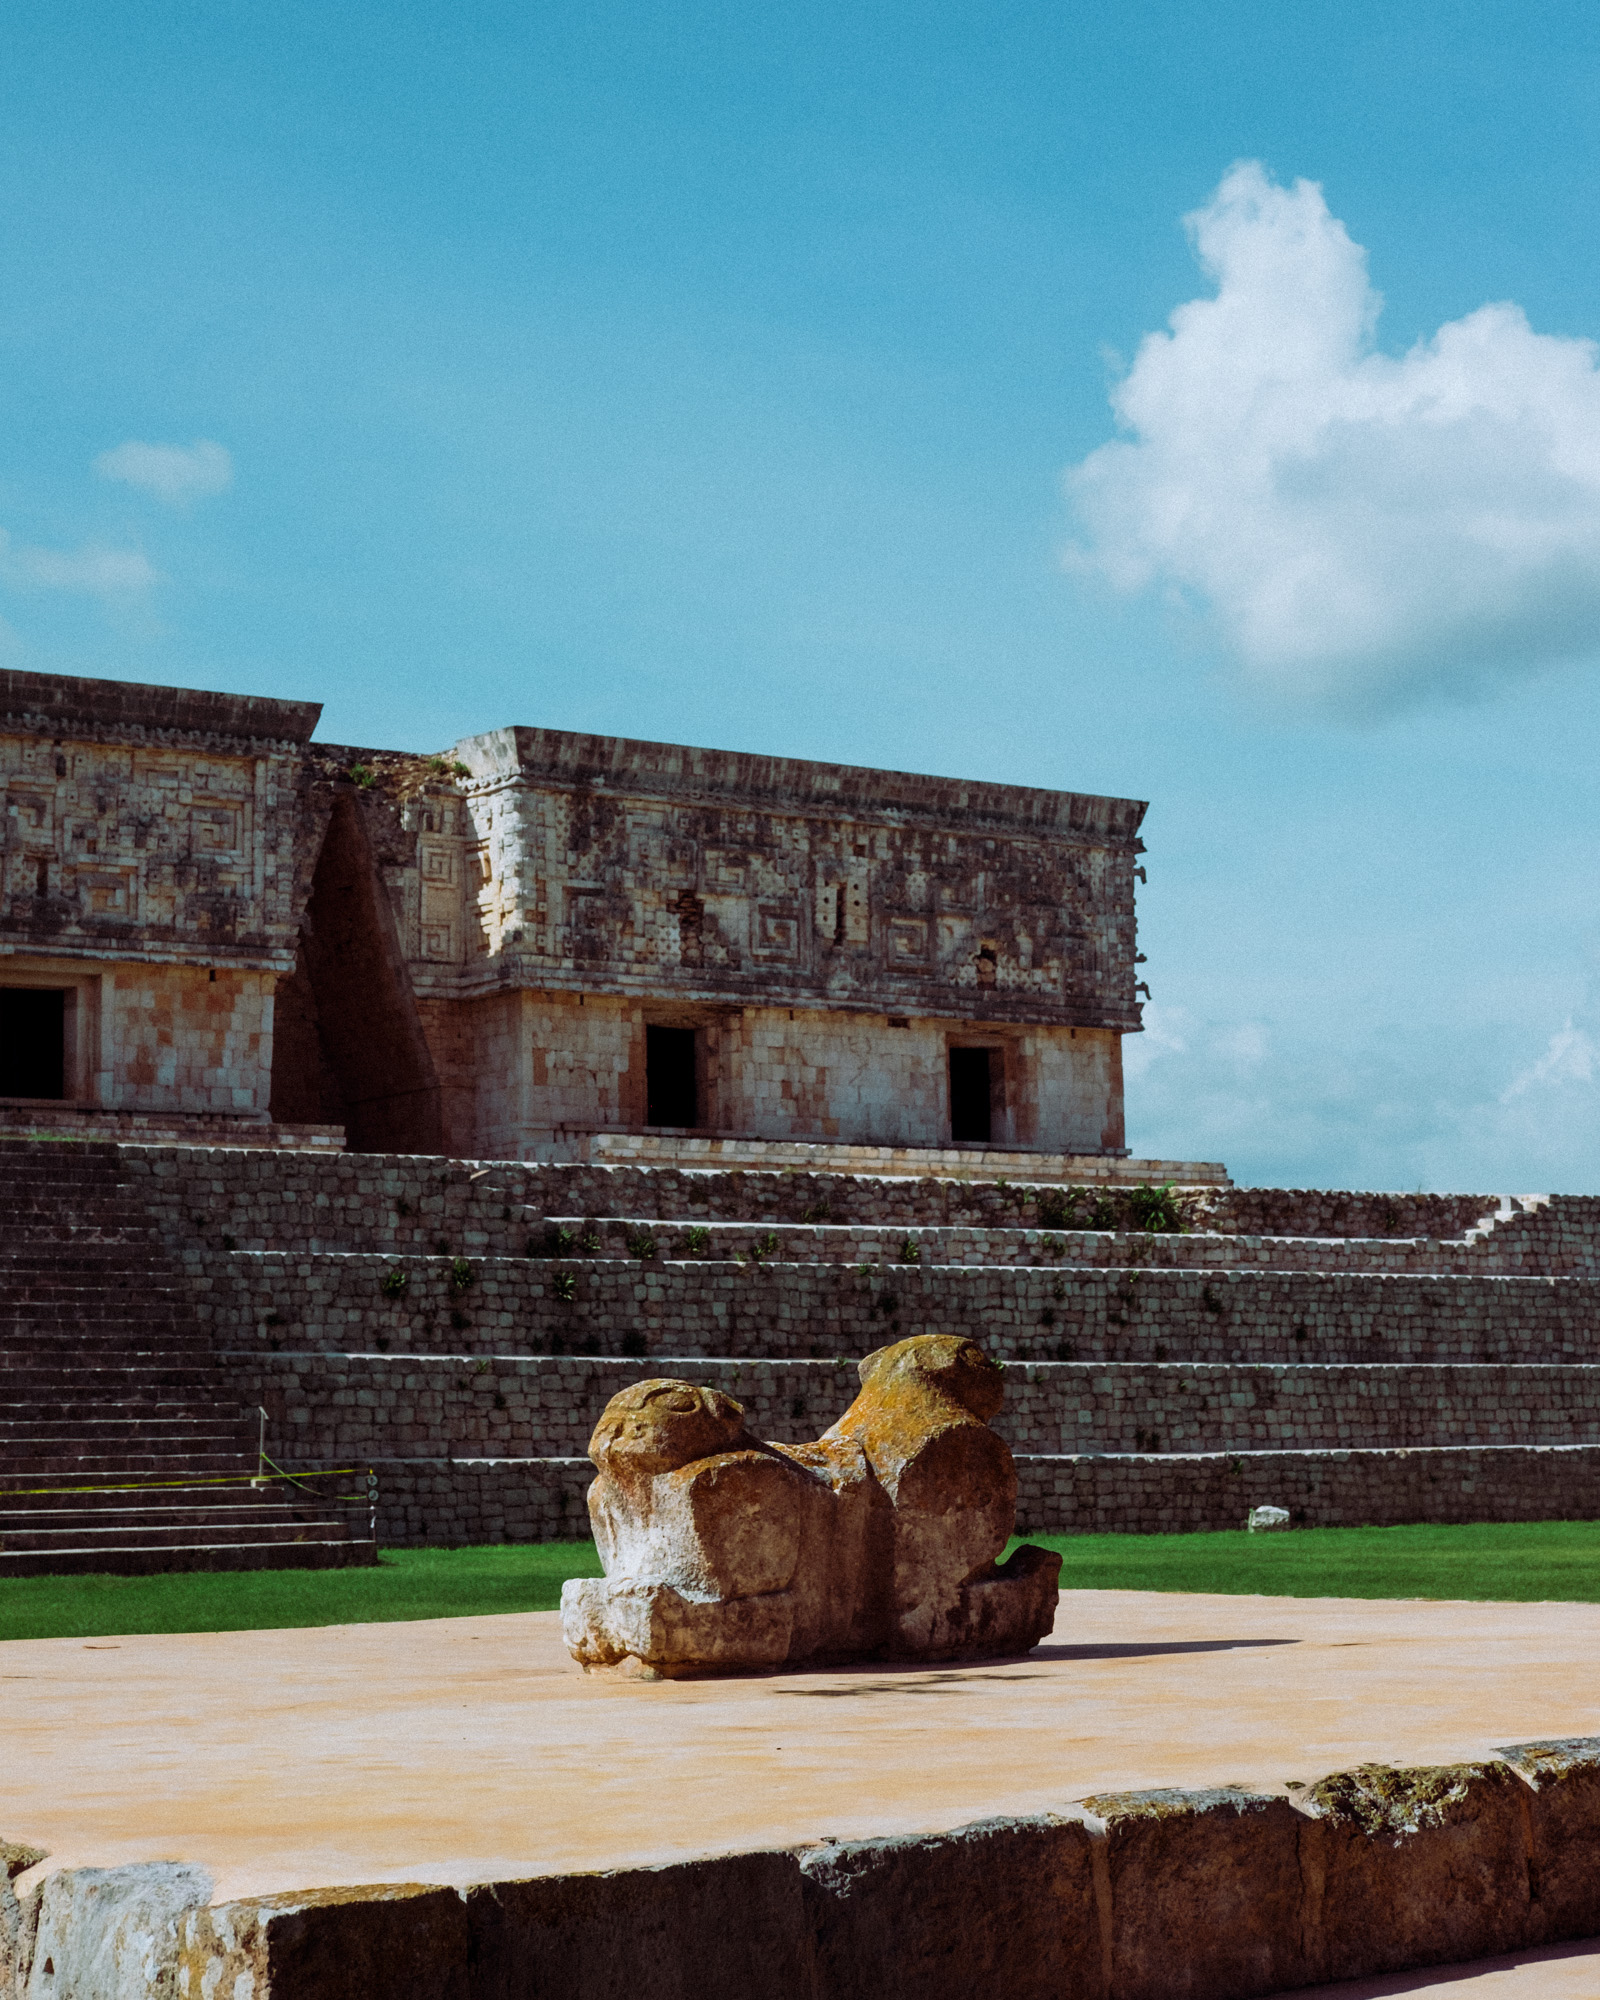 Rachel Off Duty: The Ancient Ruins at Uxmal, Mexico